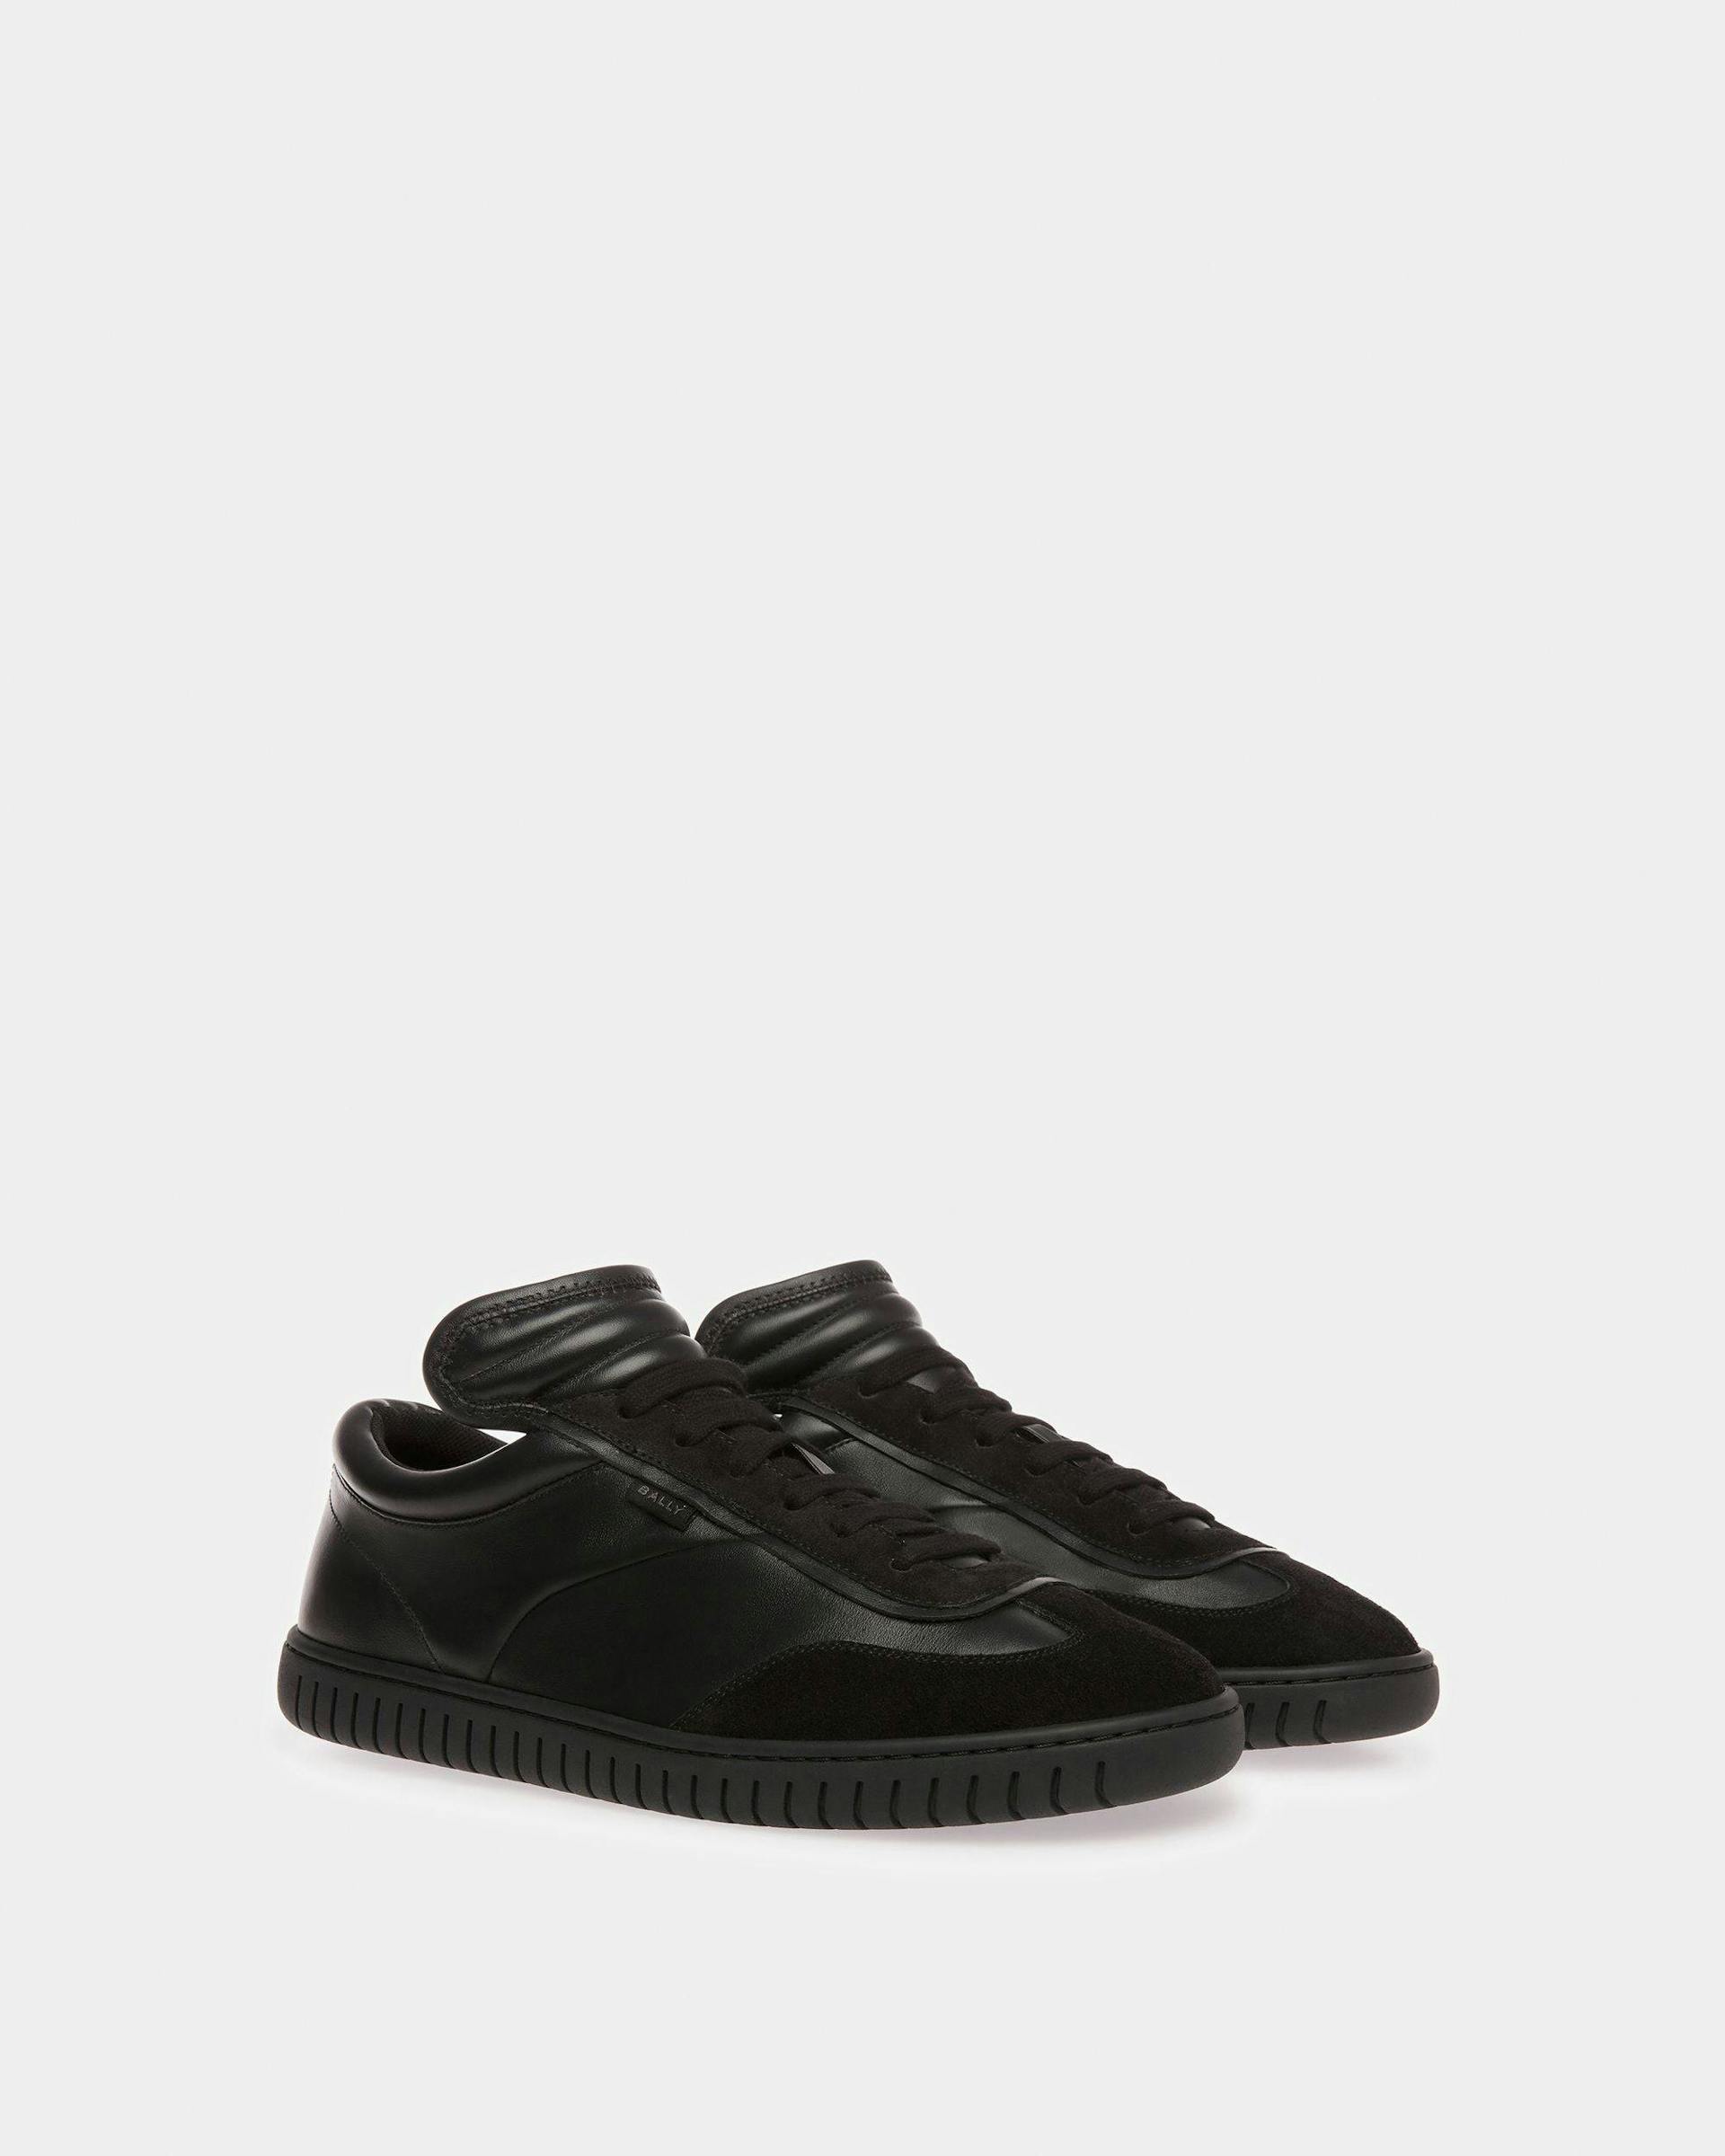 Men's Player Sneakers In Black Leather | Bally | Still Life 3/4 Front